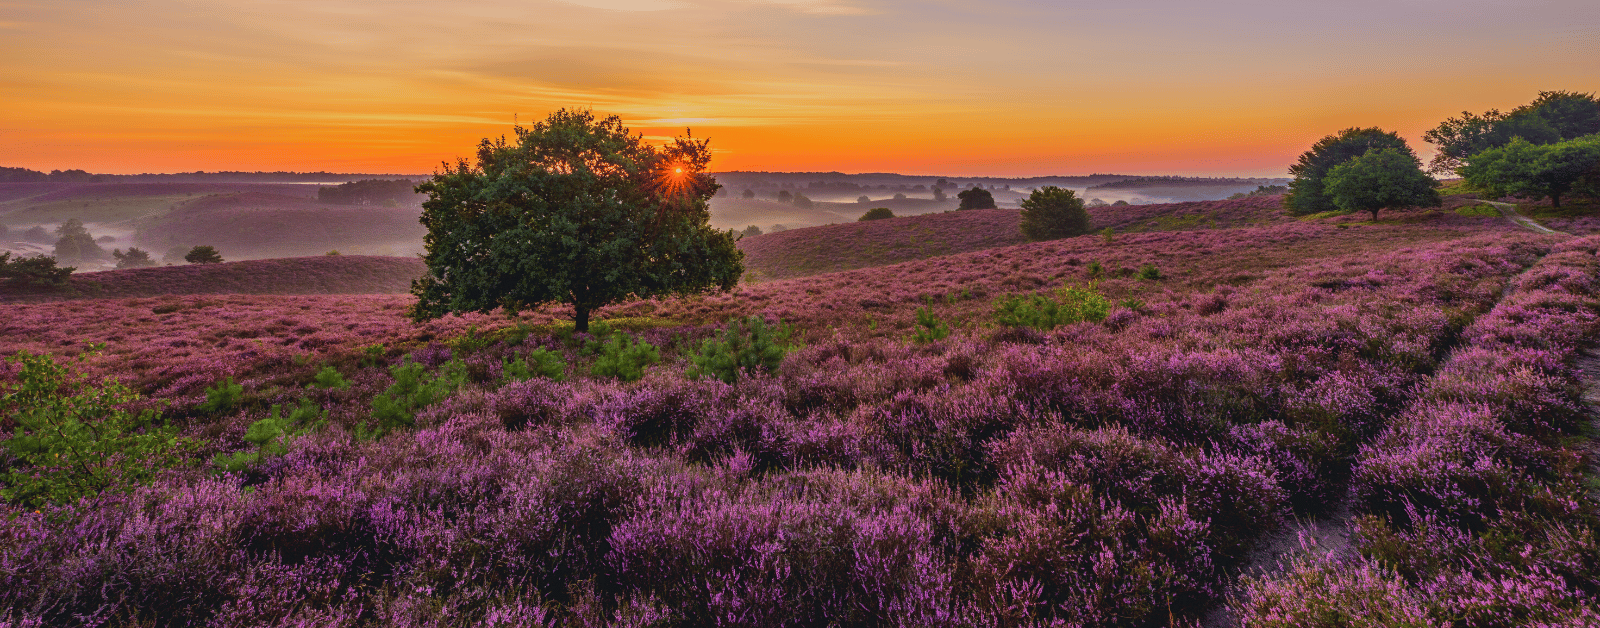 late summer sunrise with purple grasses in the foreground